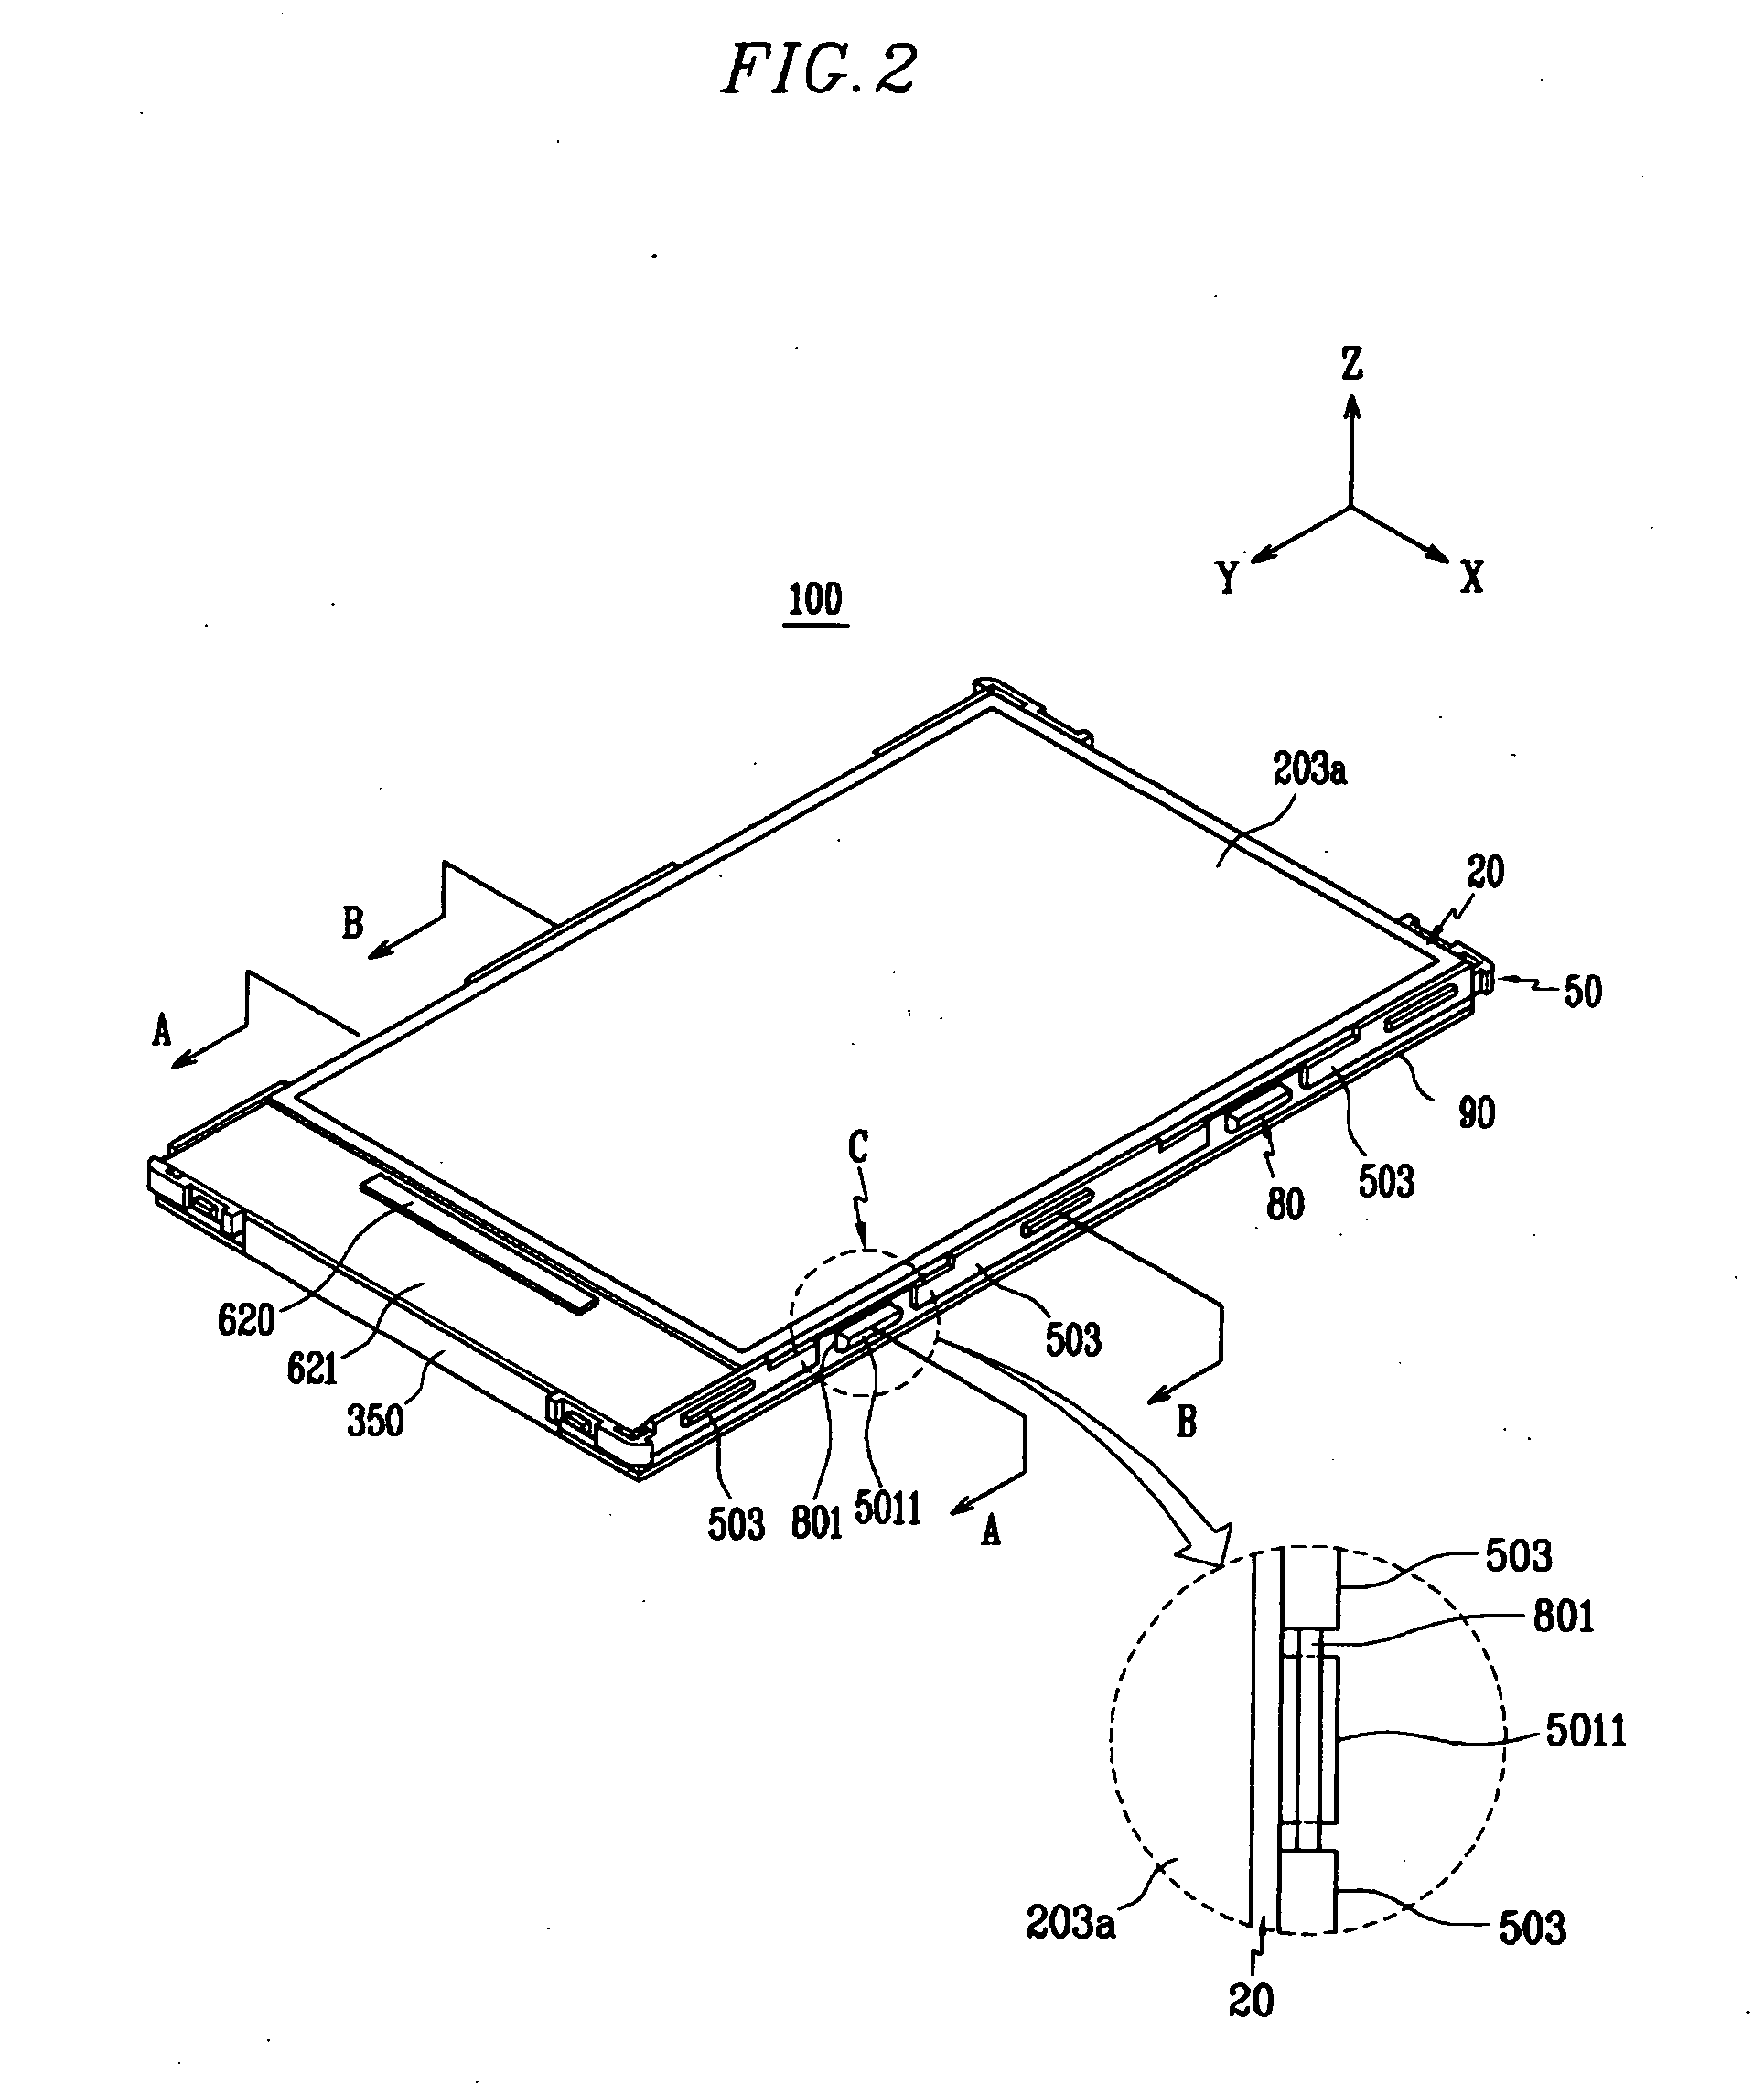 Display device having an enlarged display area